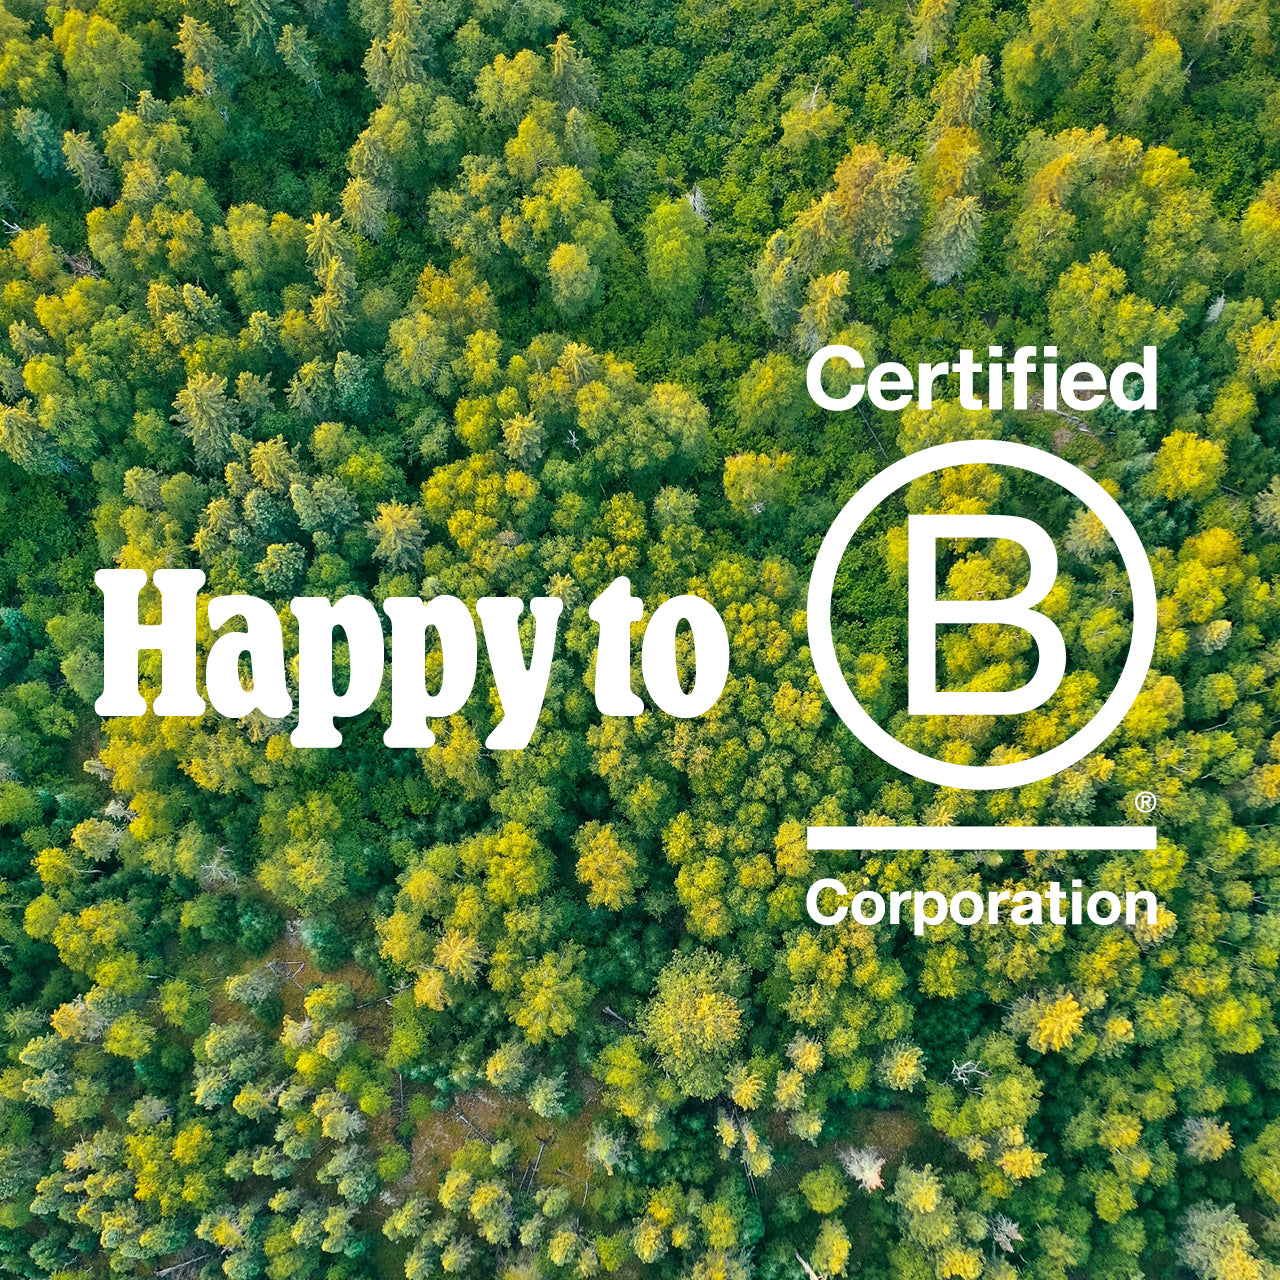 Planted obtains B Corp Certification